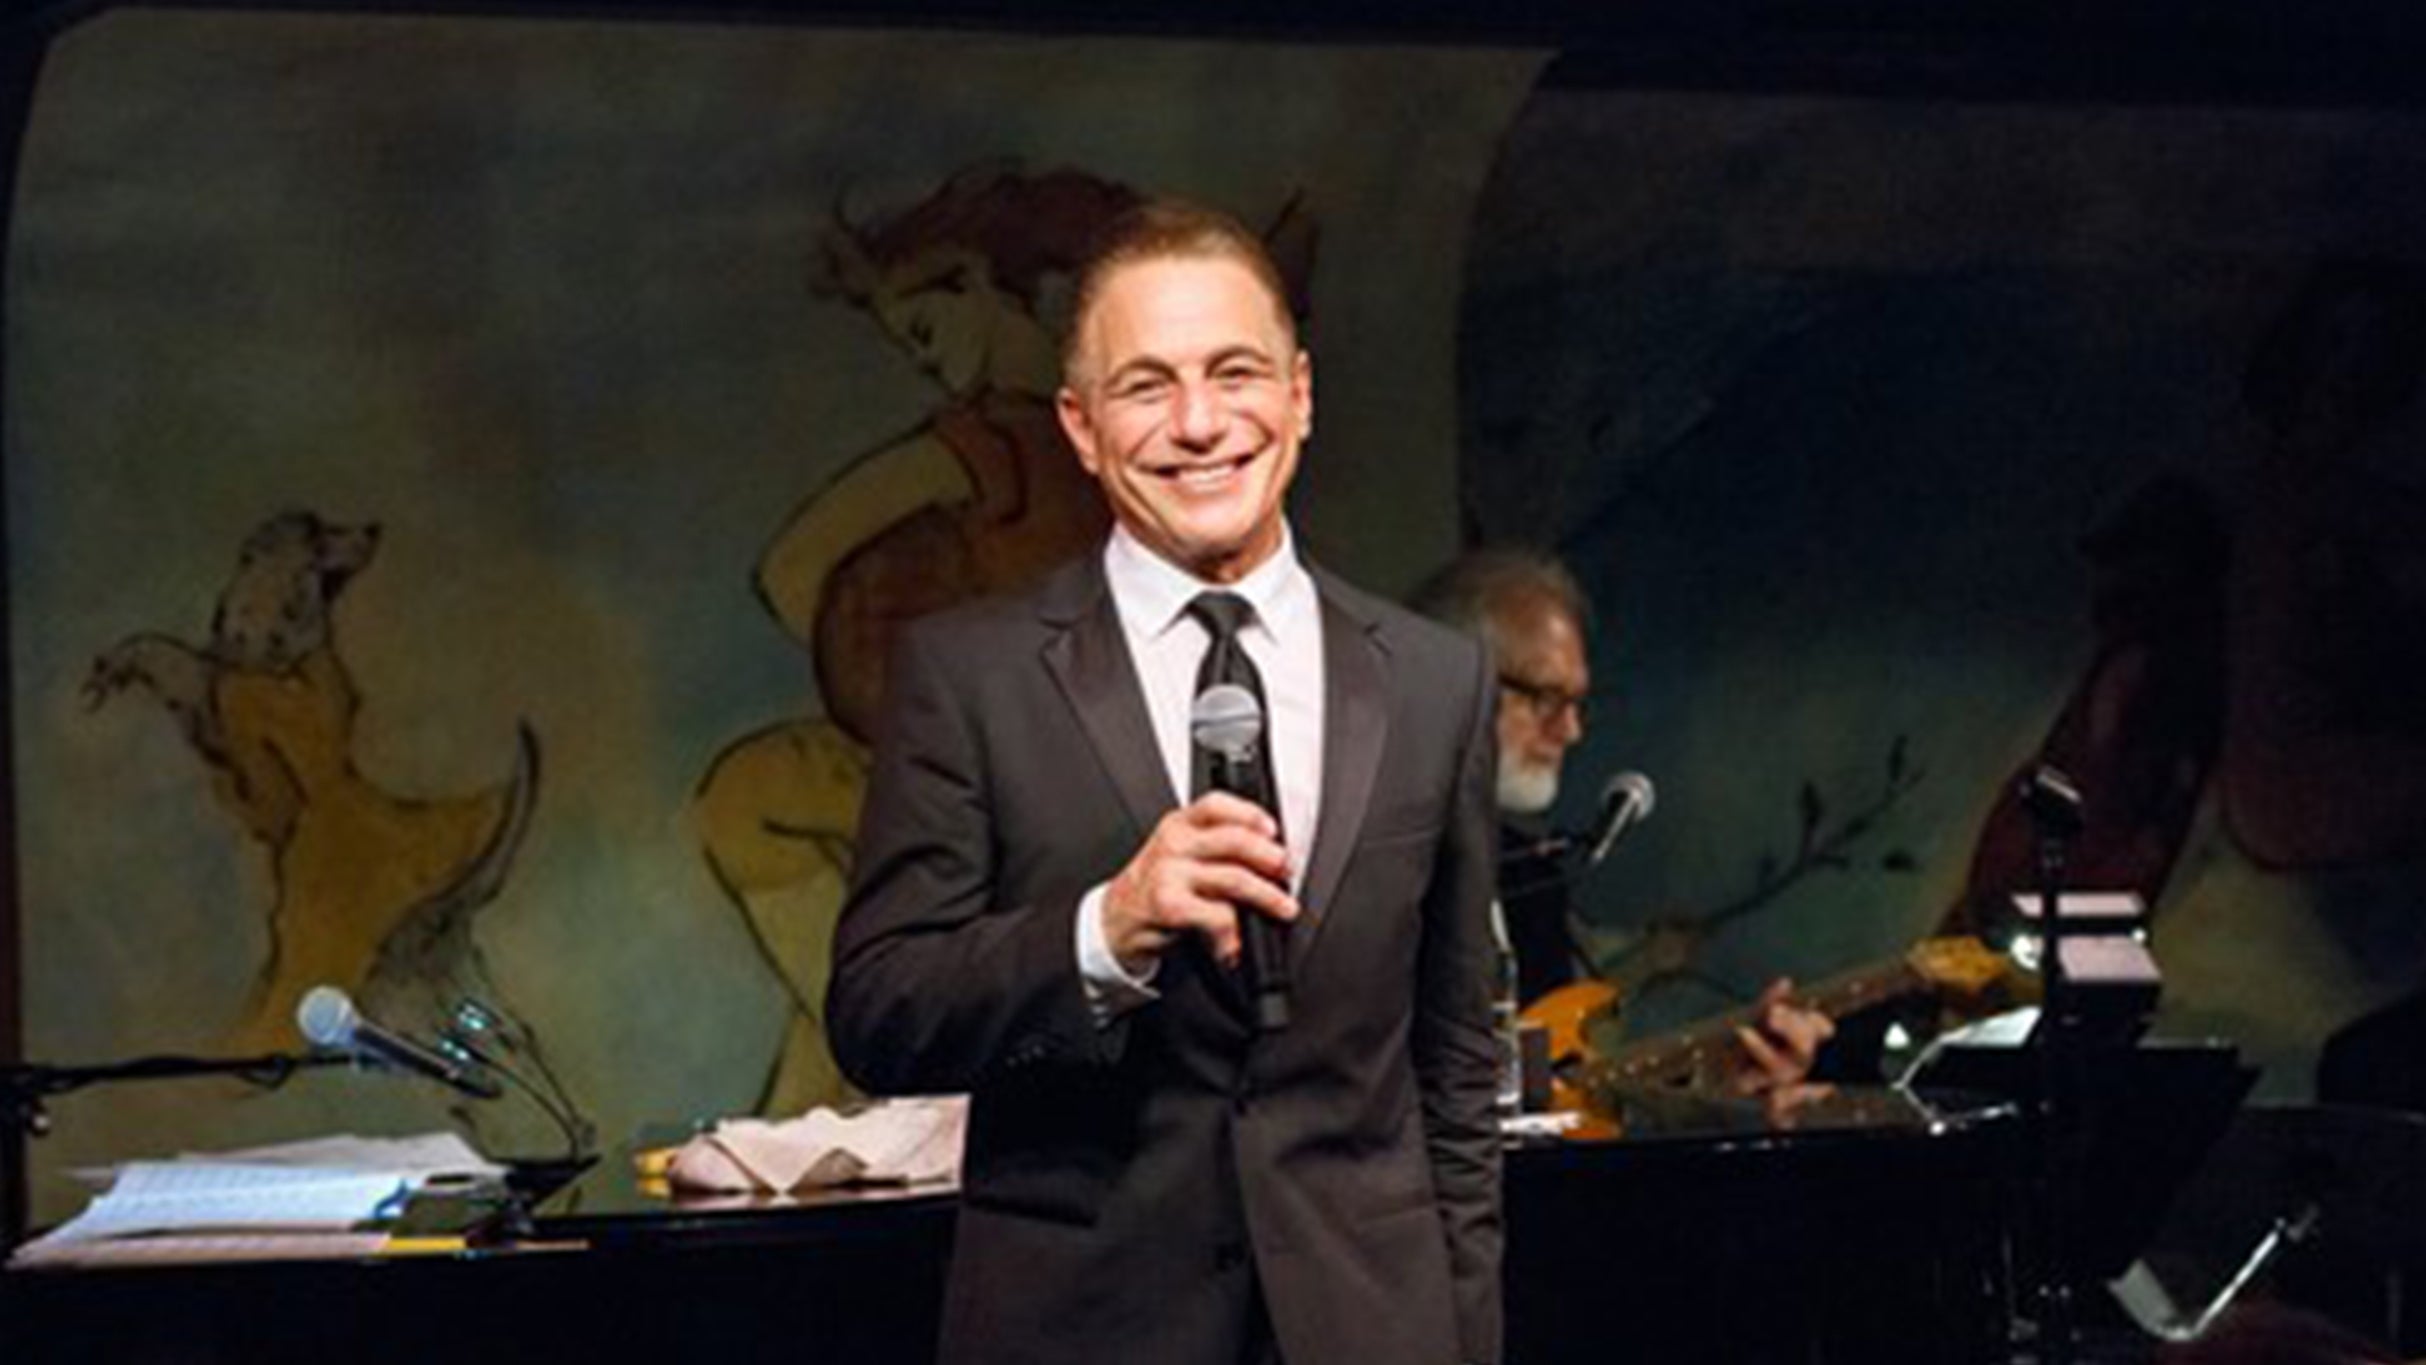 Tony Danza: Standards And Stories at The Stanley